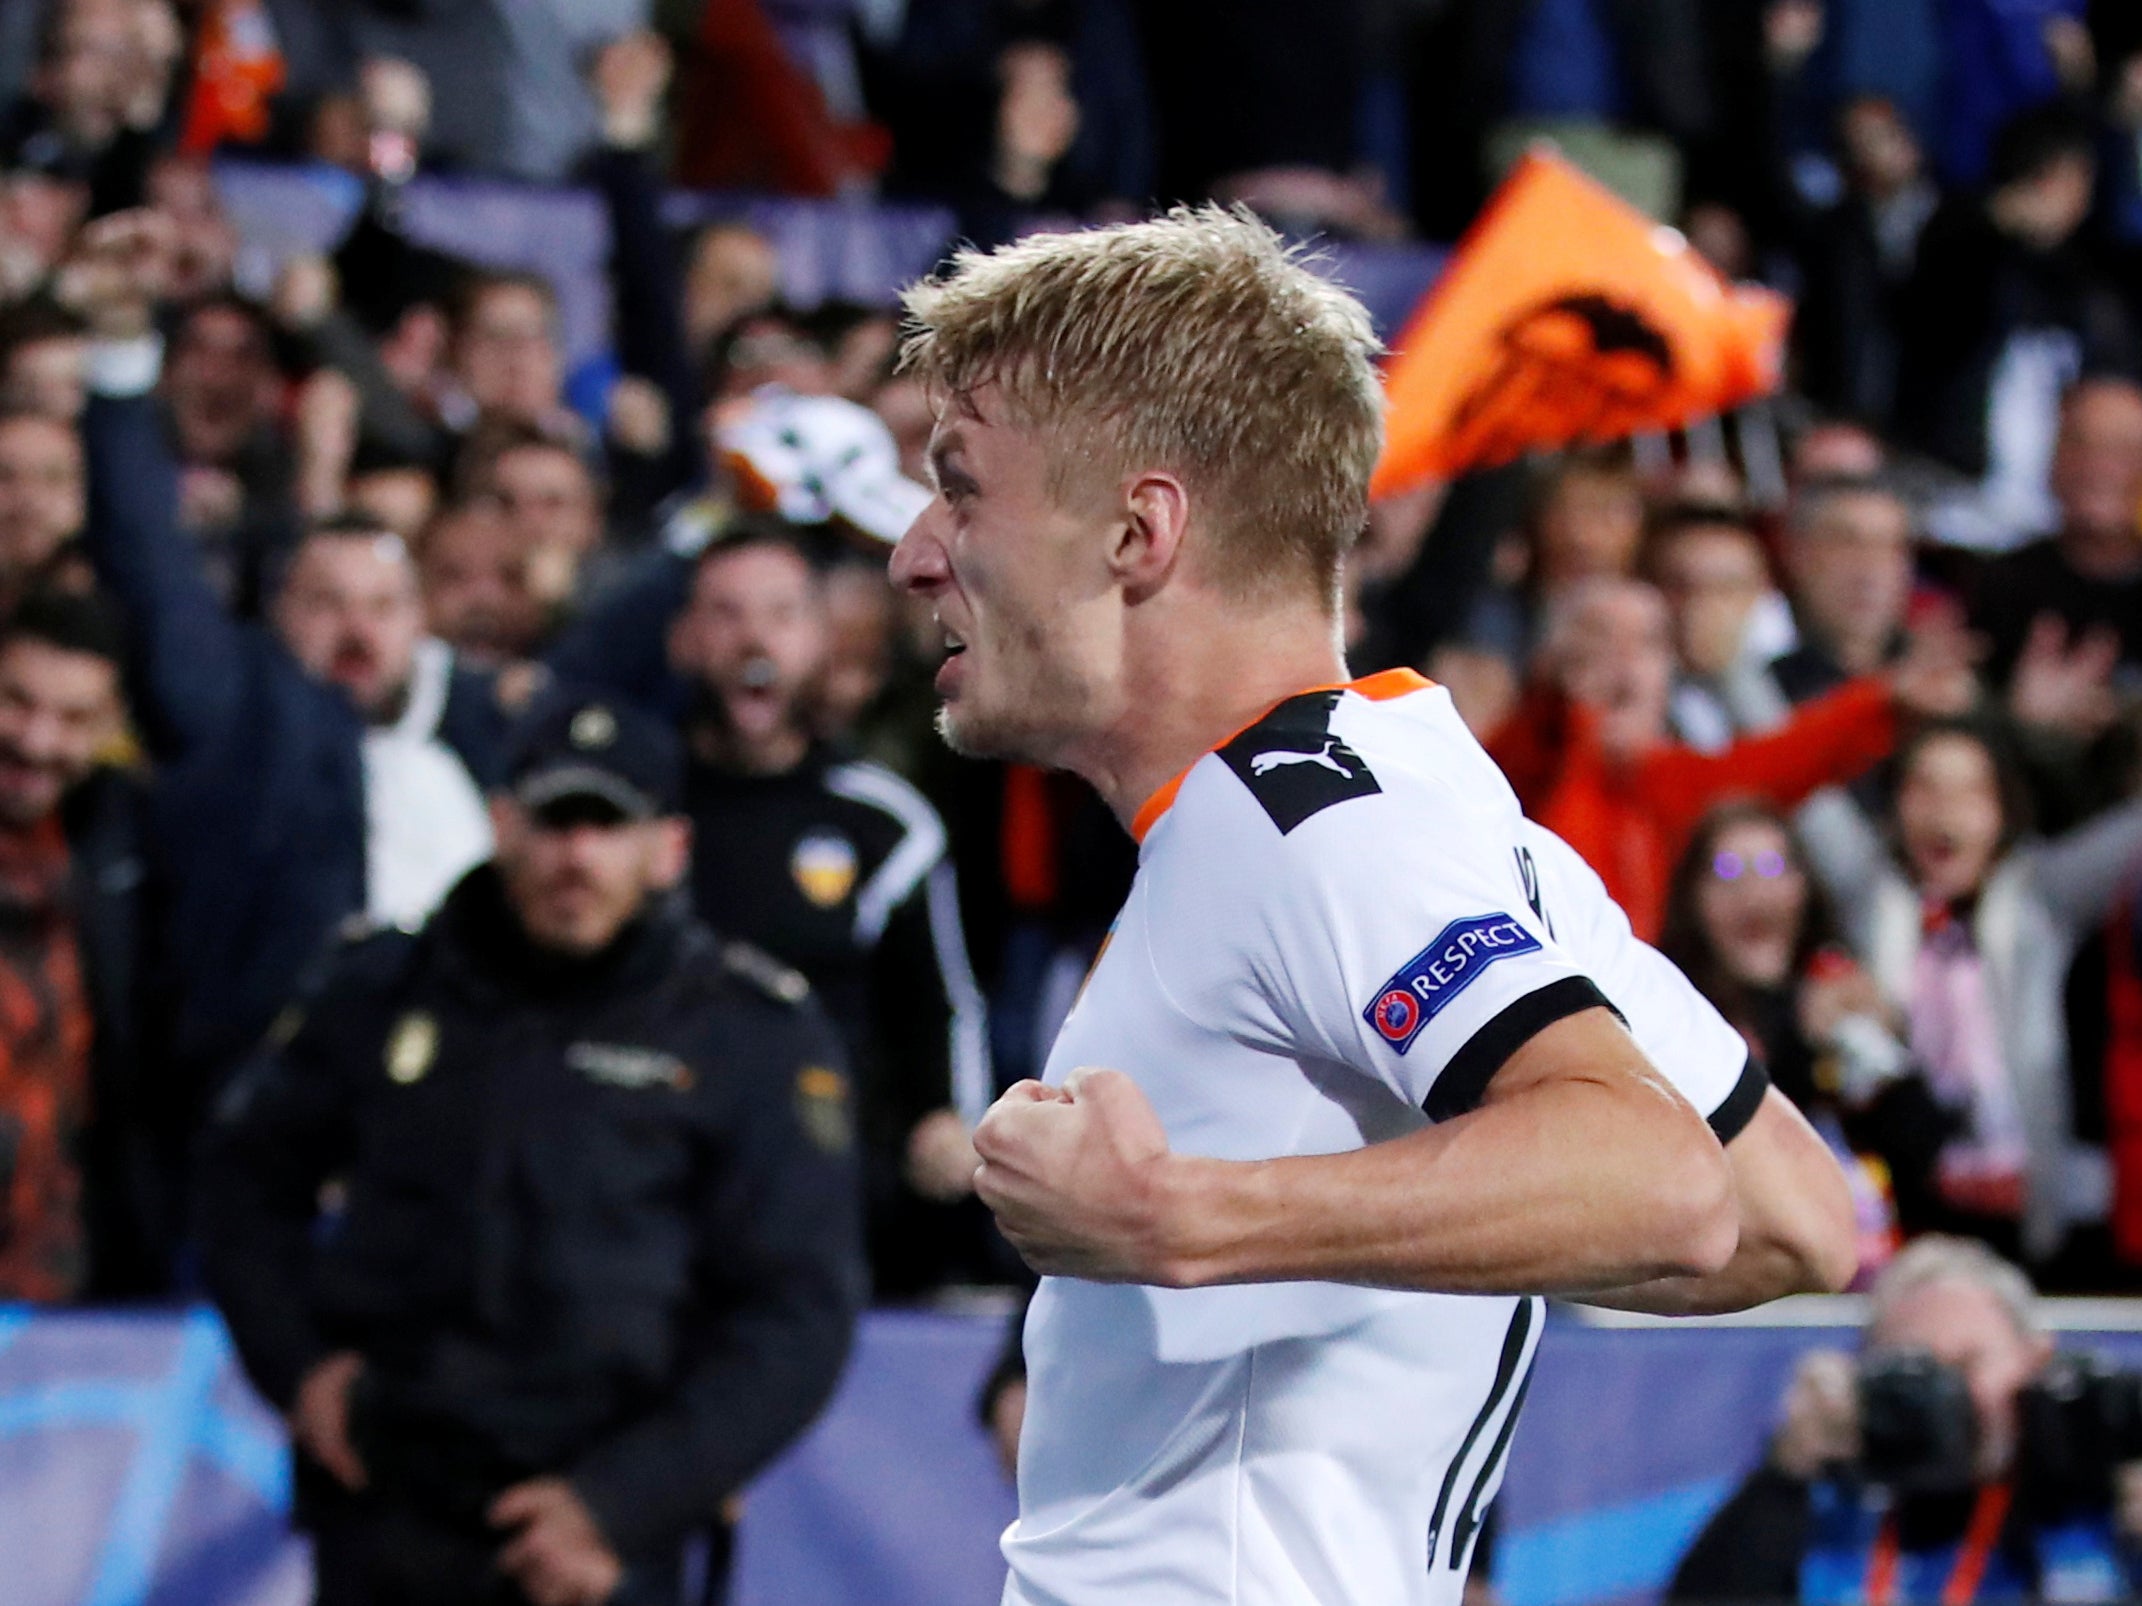 Daniel Wass scored with what appeared to be an attempted cross